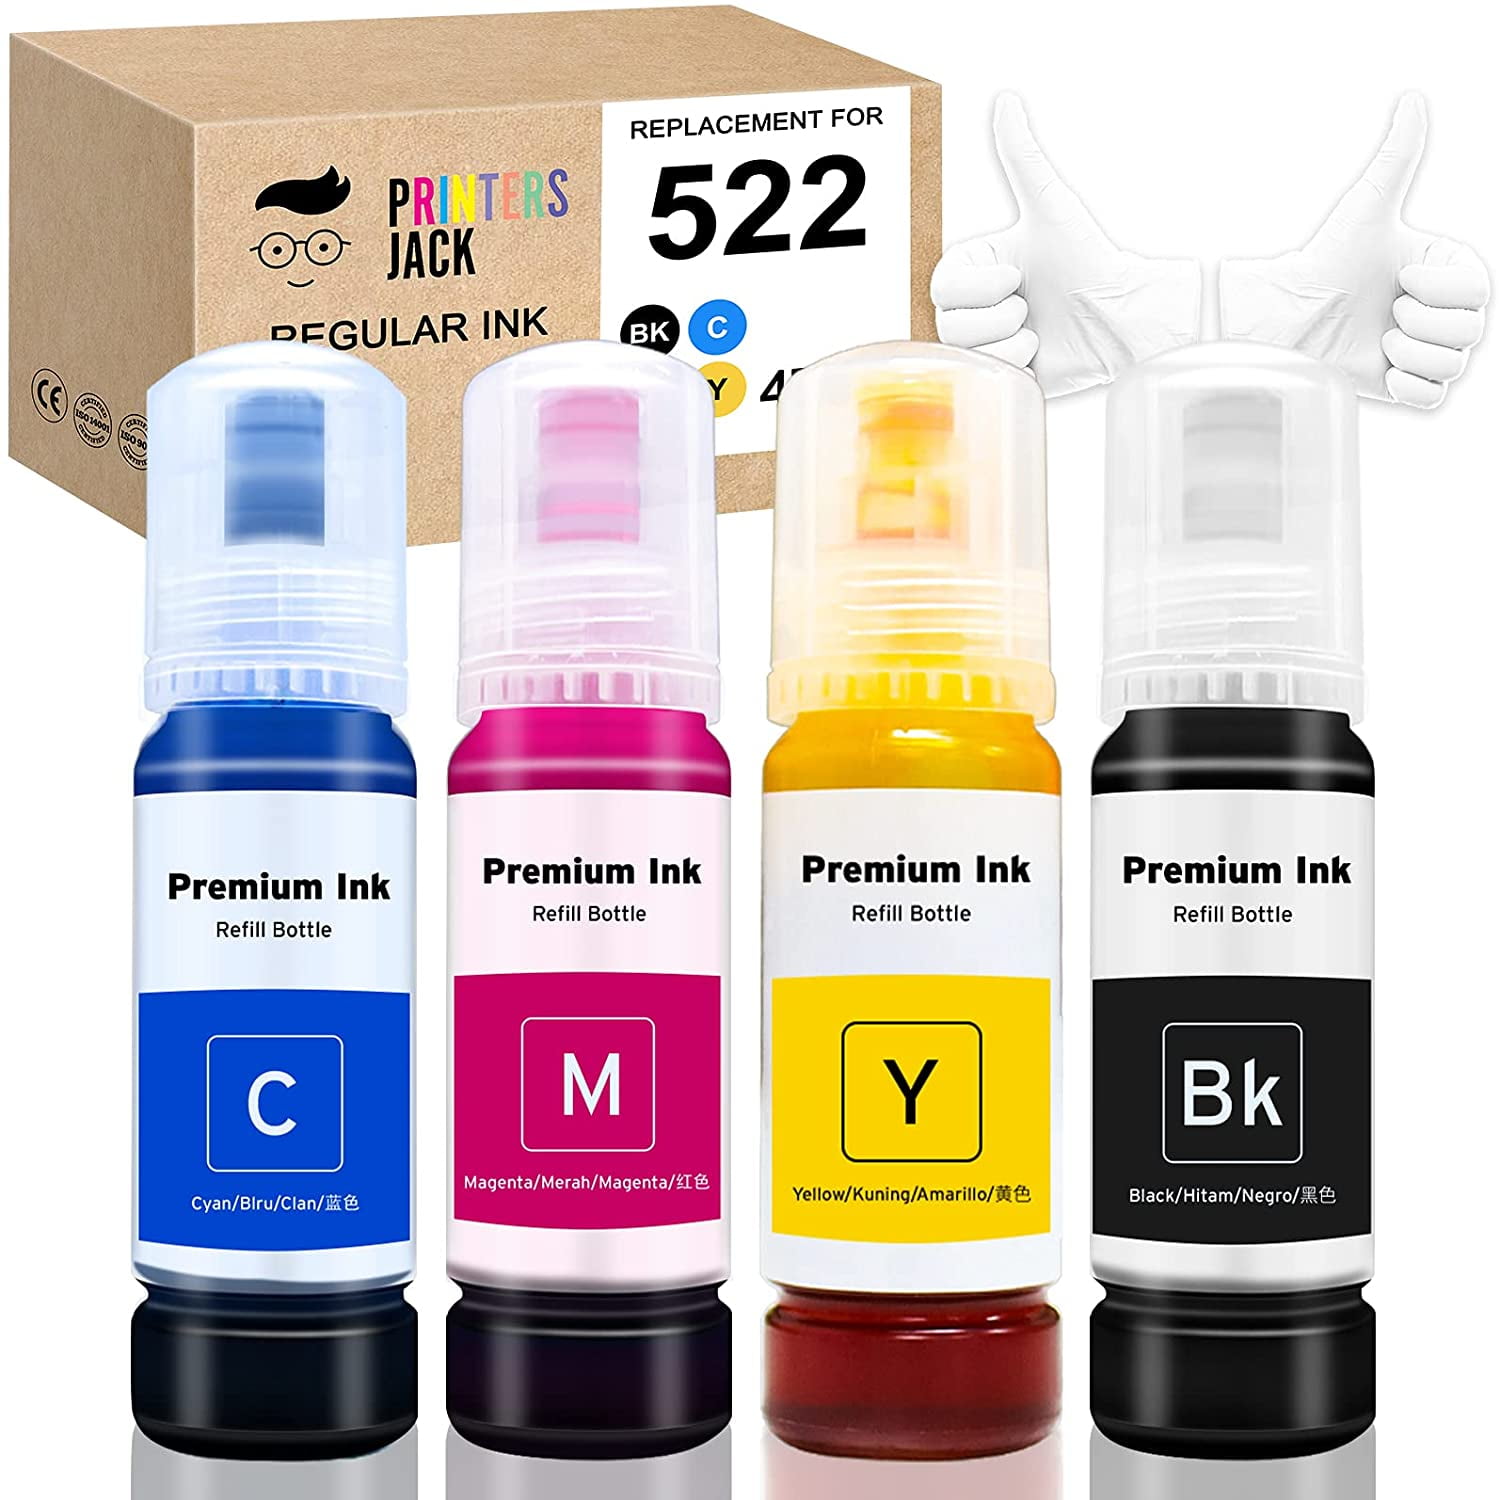 RECHARGE JET D'ENCRE EPSON N°102 NOIR/CYAN/MAGENTA/YELLOW 337ml 25500 Pages